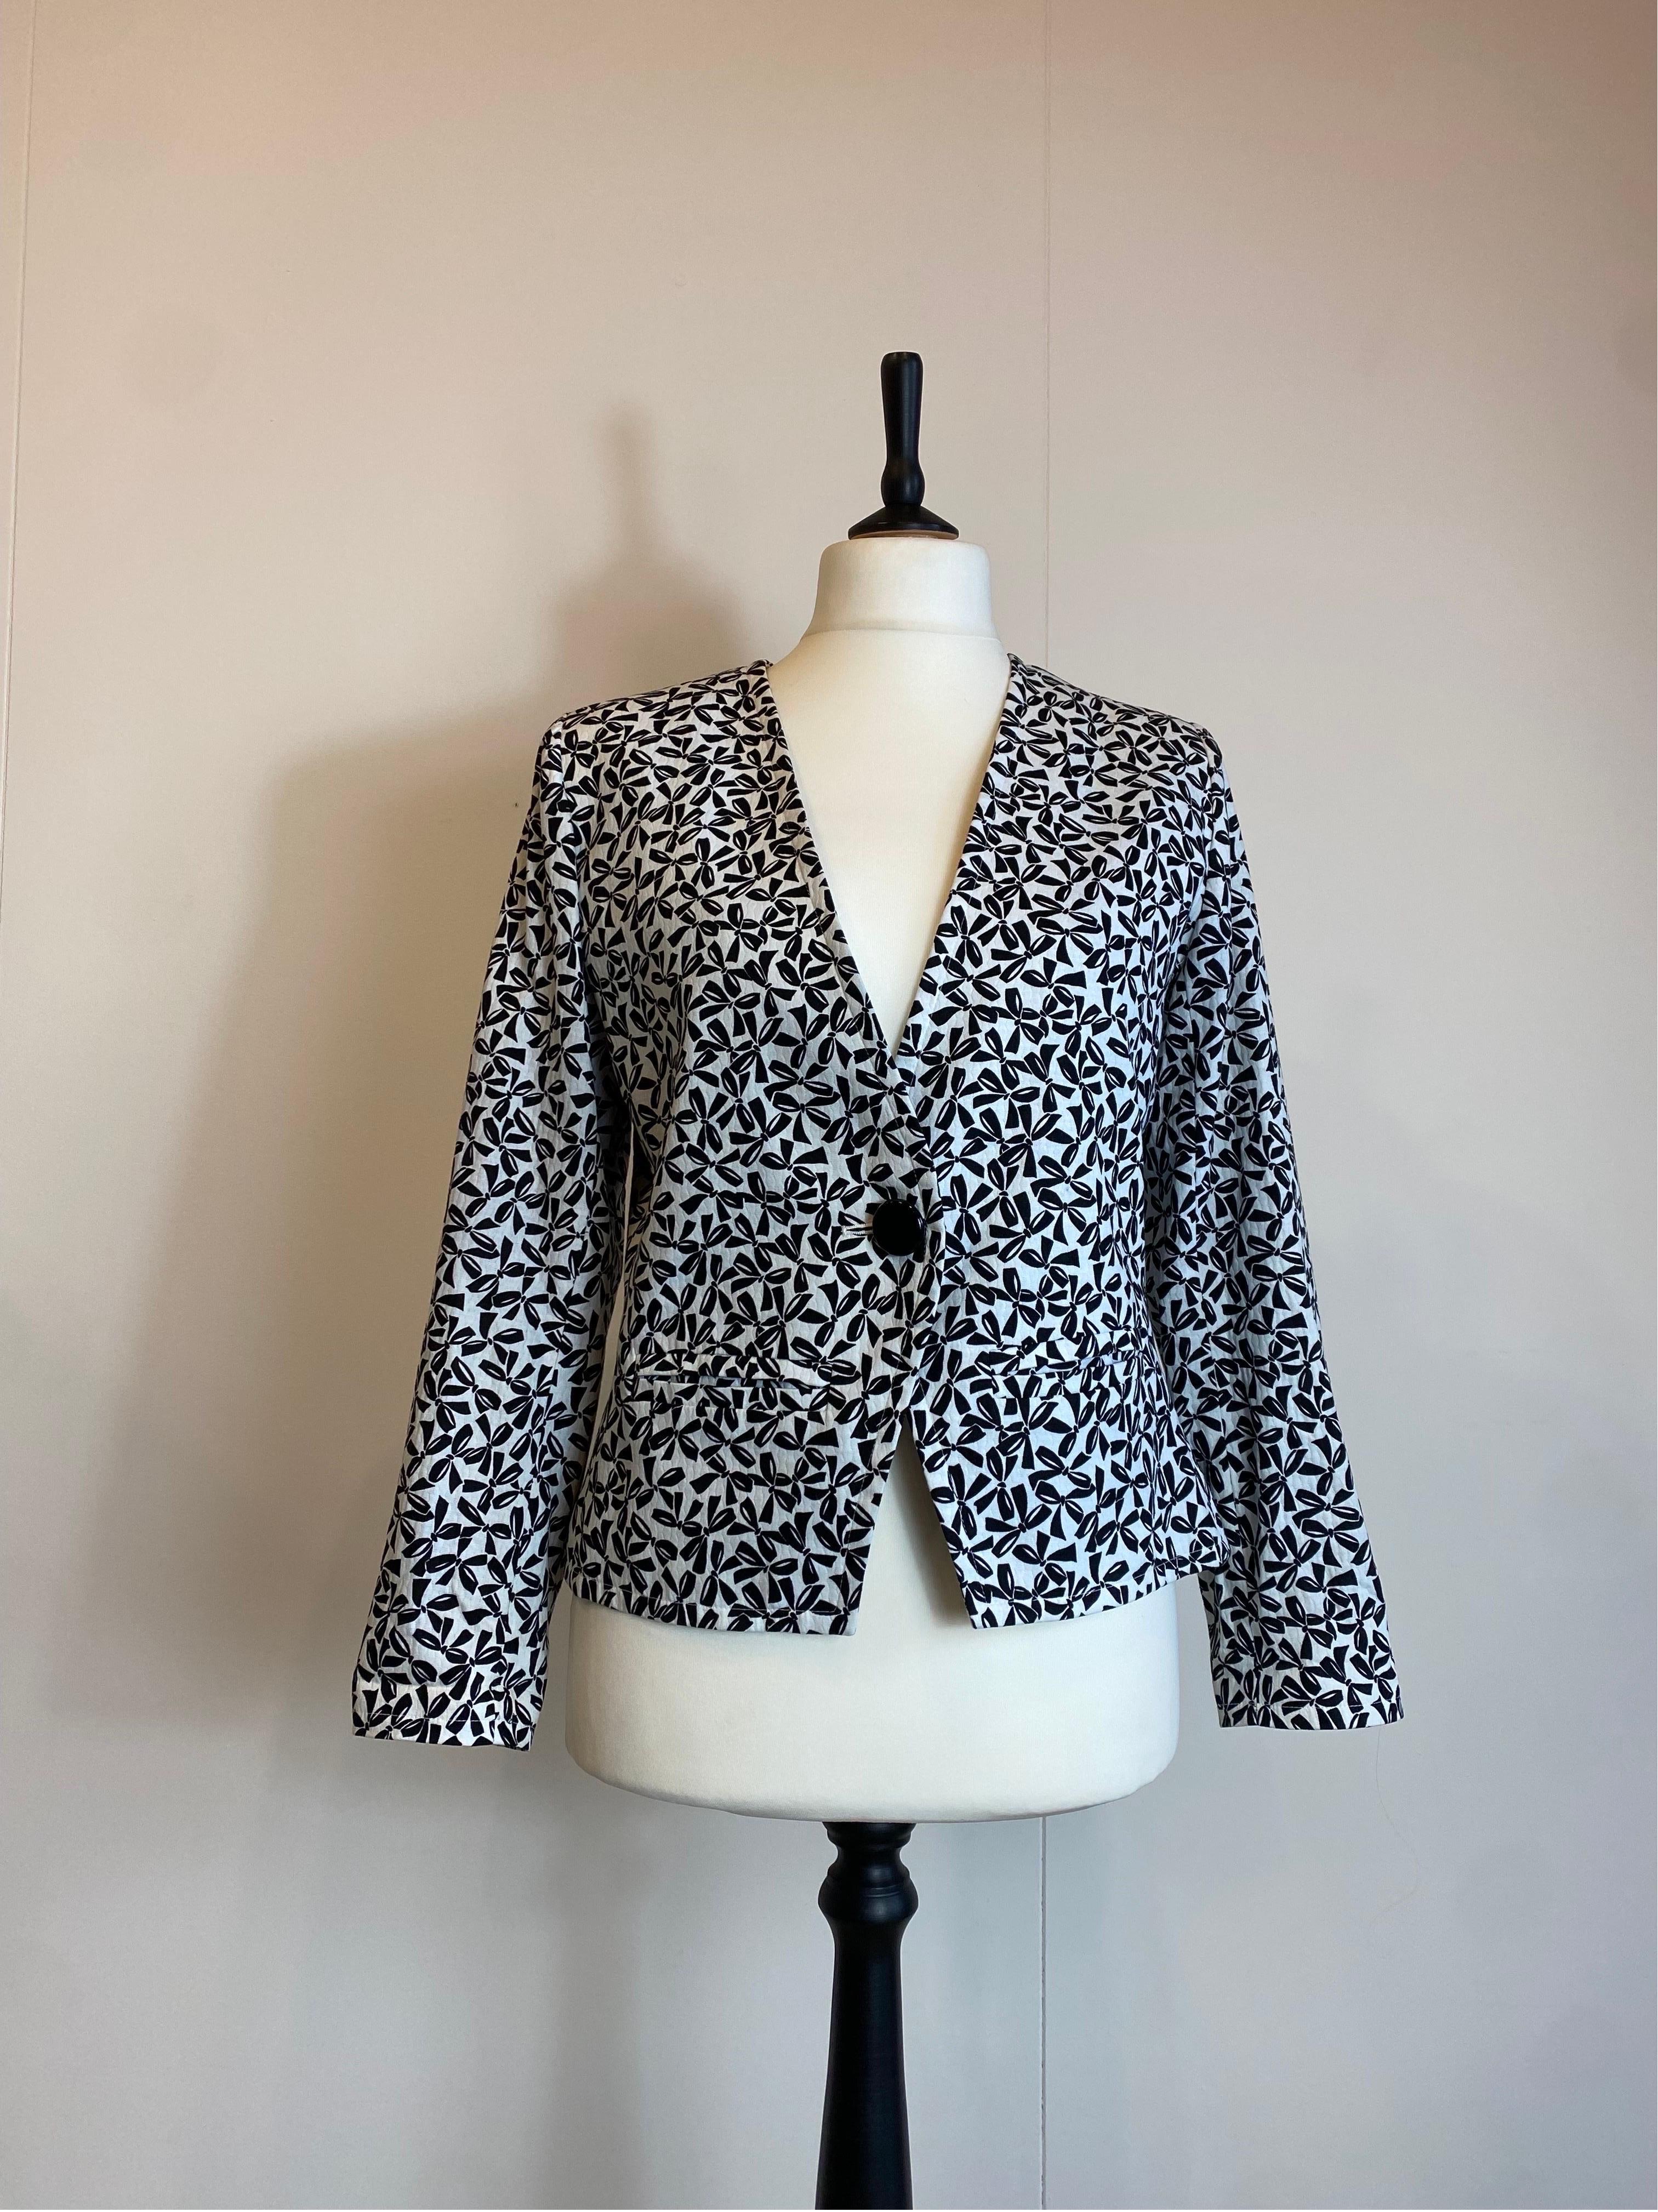 Yves Saint Laurent Variation jacket.
Composition label missing but we think it is cotton.Lined.
Features padded shoulder straps.
French size 44 but Italian fit.
Shoulders 44 cm
Bust 50 cm
Length 58 cm
Sleeve 60 cm
Excellent general condition, shows